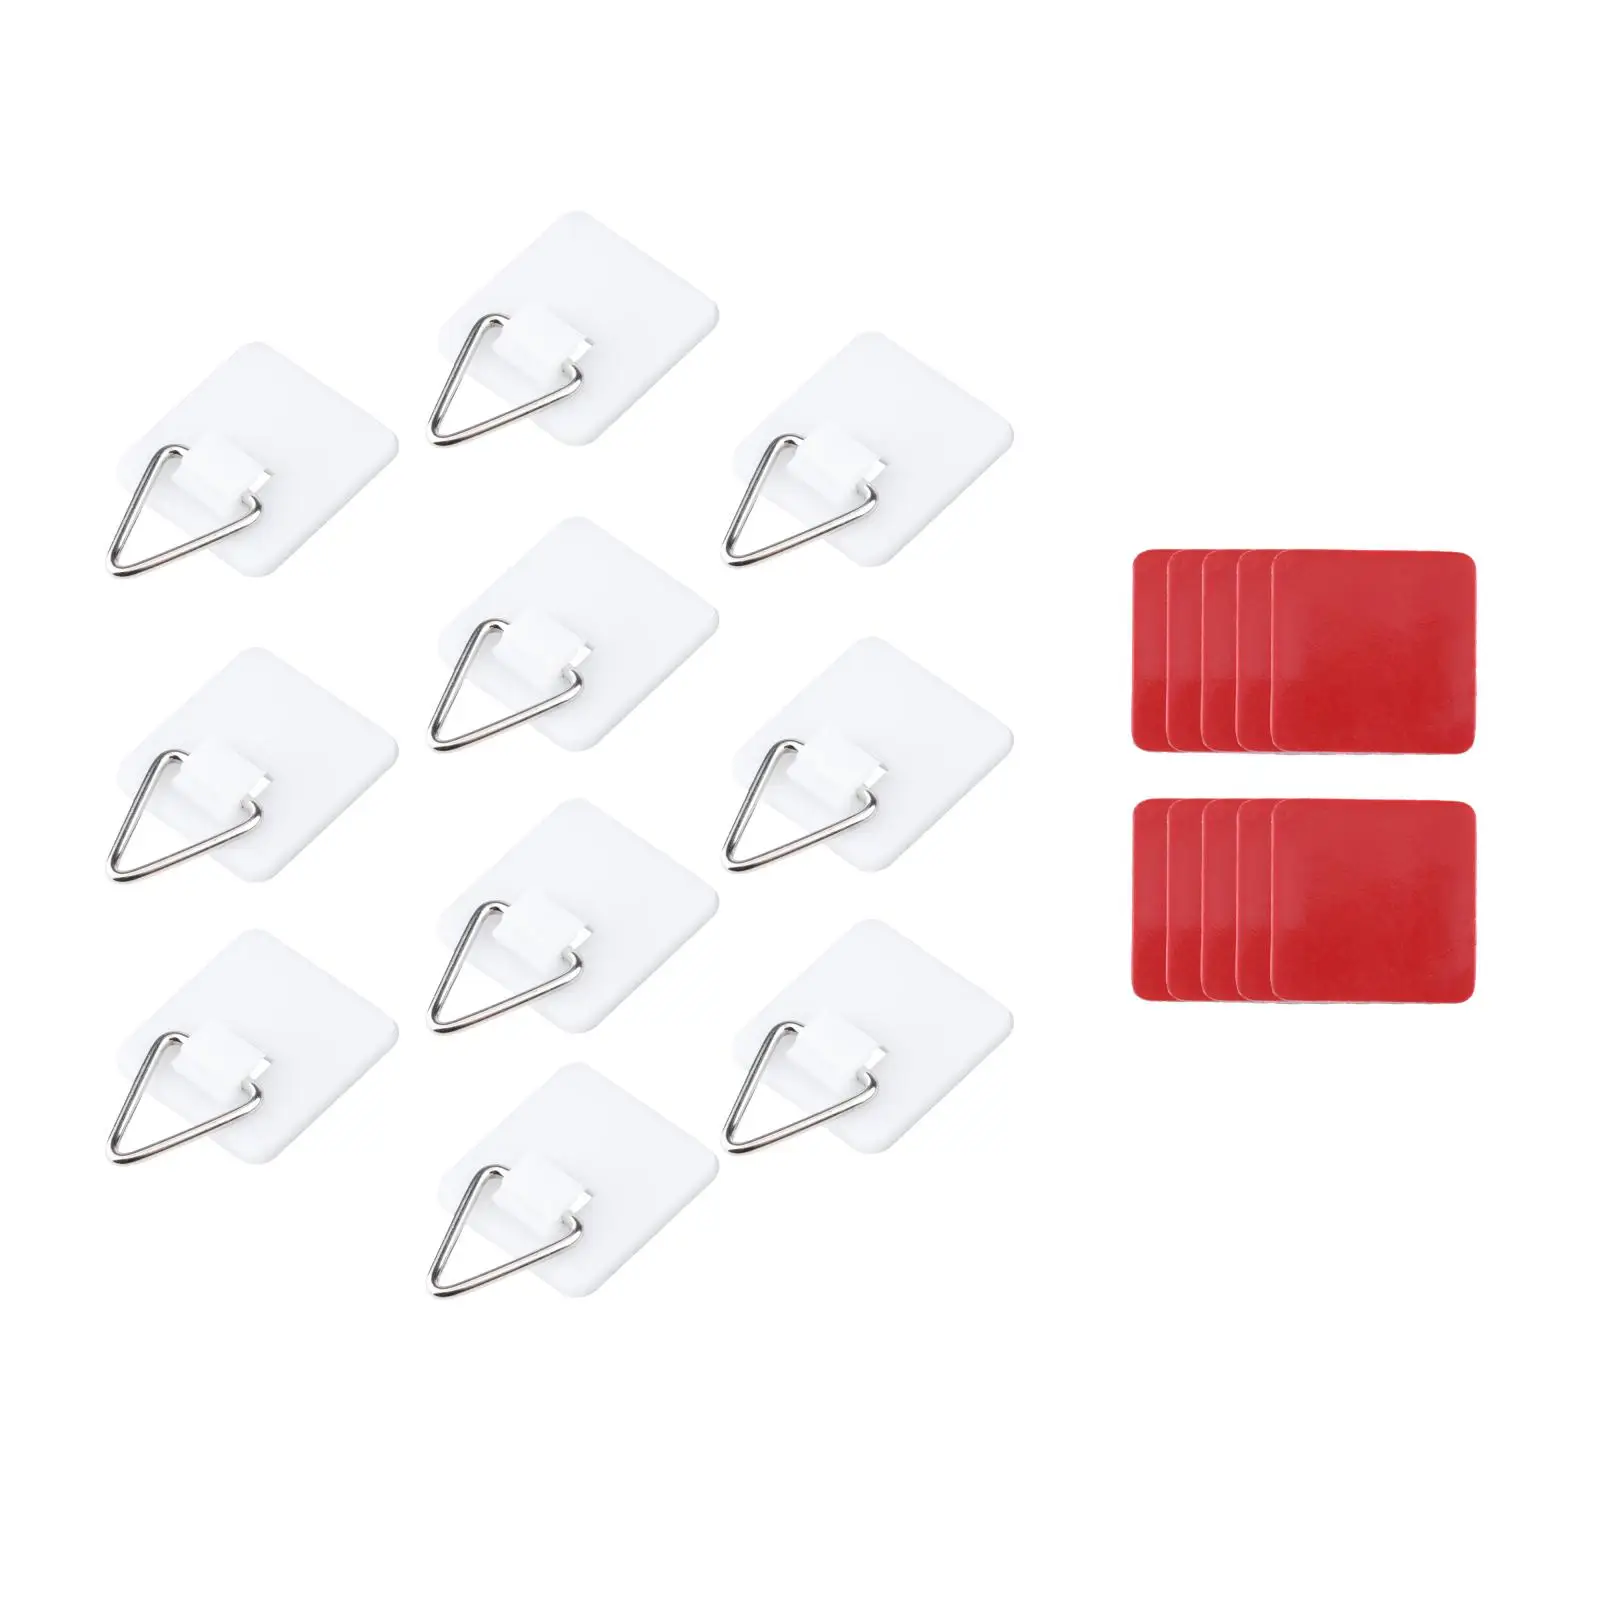 10pcs Vertical Plate Holders Wall Dish Hook Portable Self-Adhesive Wall Plate Holder Invisible Adhesive Plate Hanger Set